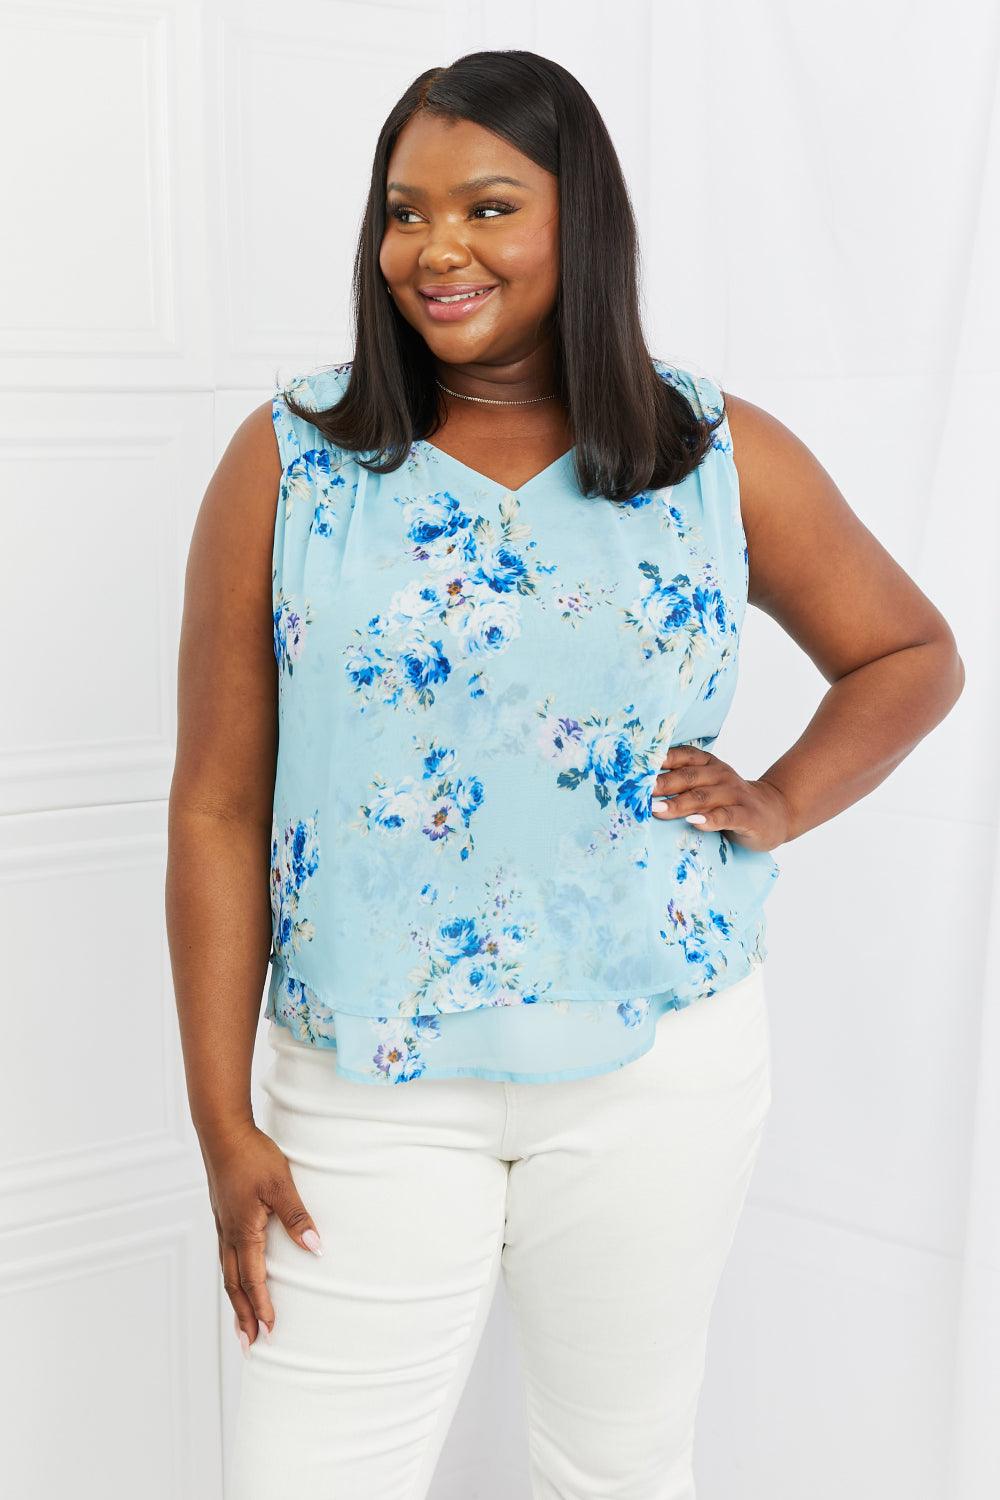 Sew In Love Off To Brunch Full Size Floral Tank Top - Glamorous Boutique USA L.L.C.